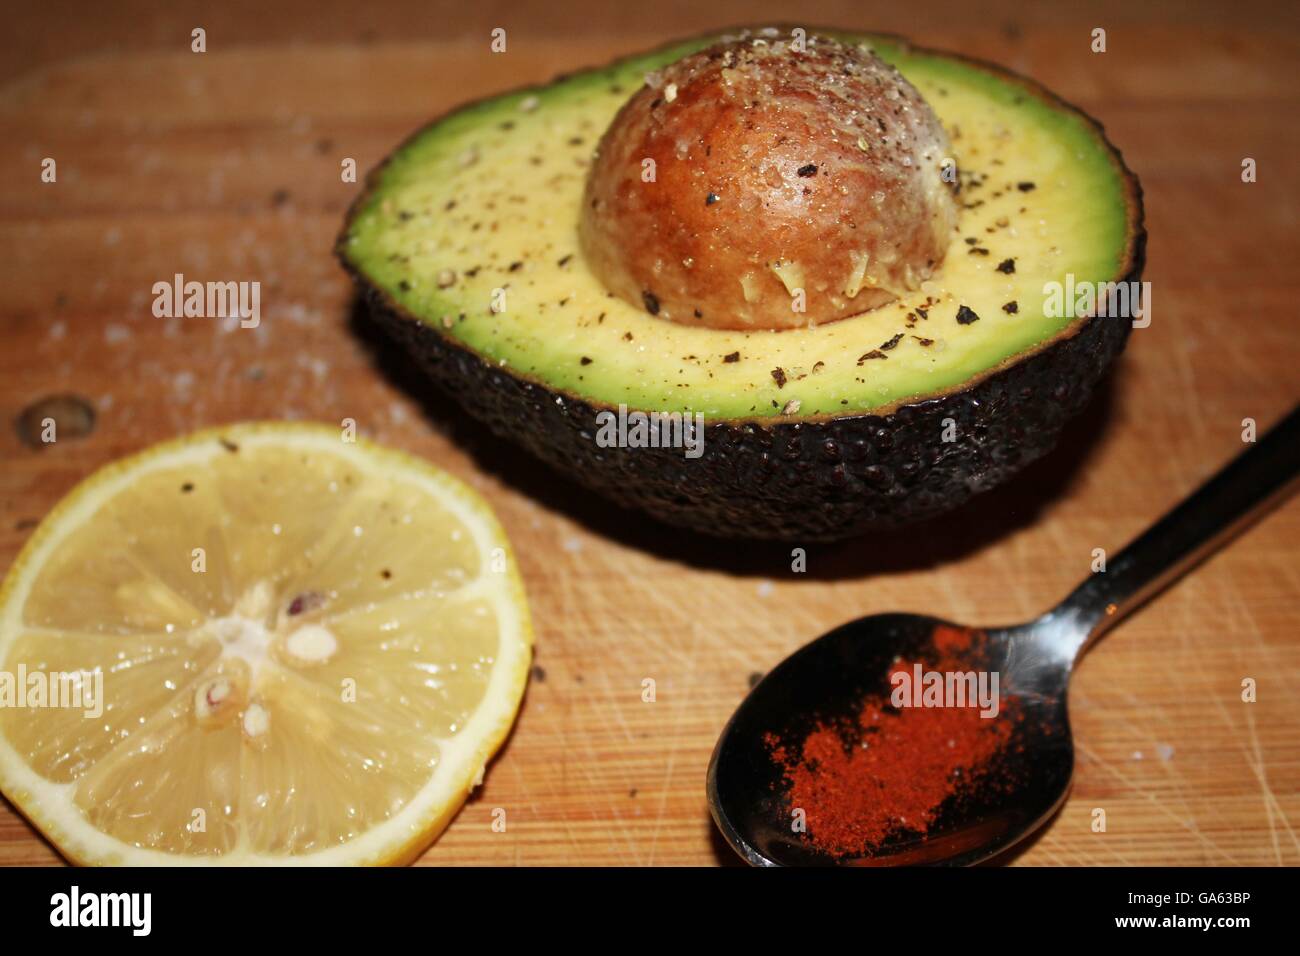 Avocado, stone in, sprinkled with salt and pepper, slice of lemon and spoonful of cayenne pepper at side on wooden board. Stock Photo